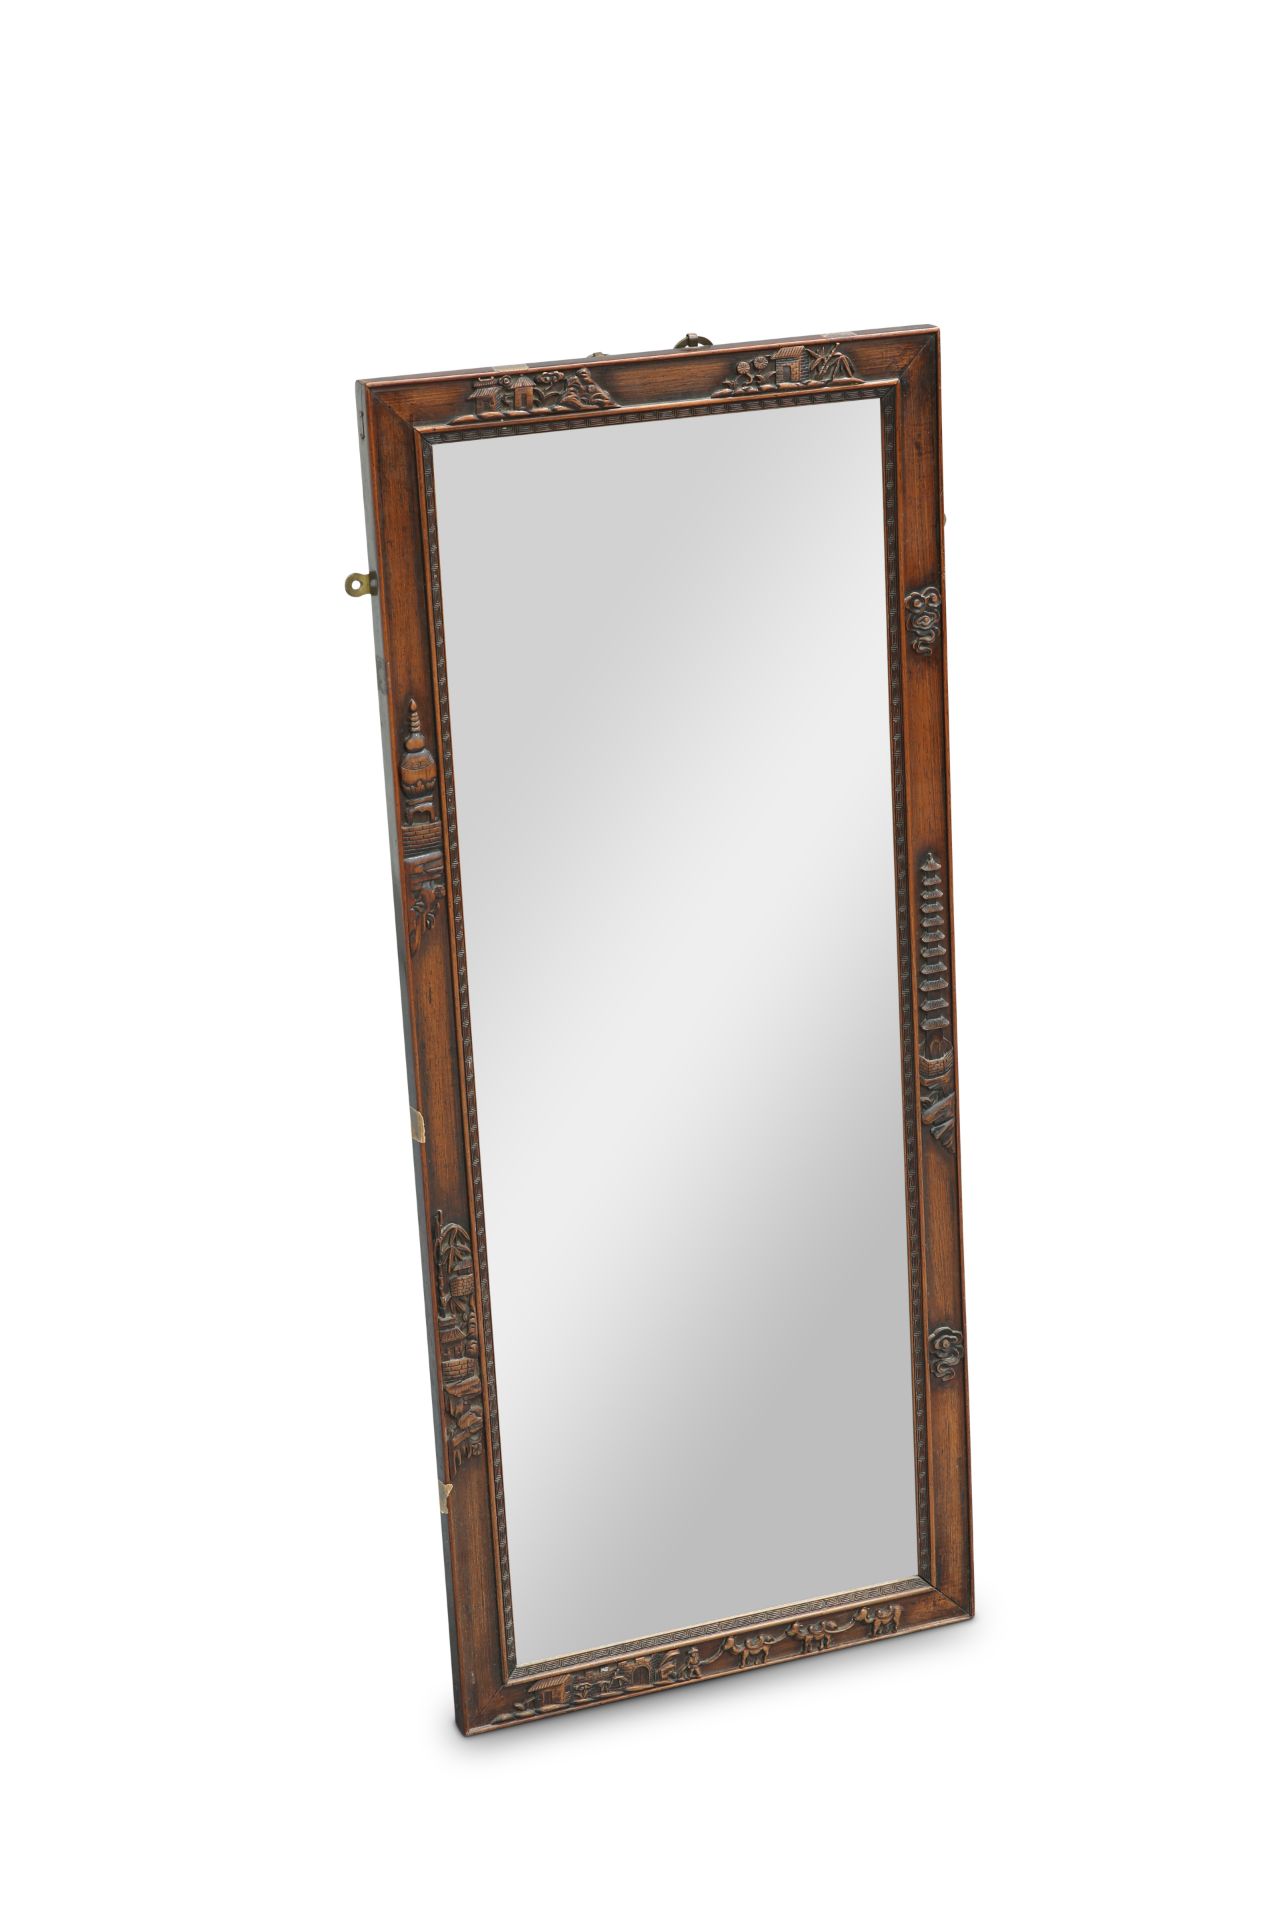 A CHINESE HARDWOOD MIRROR, EARLY 20TH CENTURY